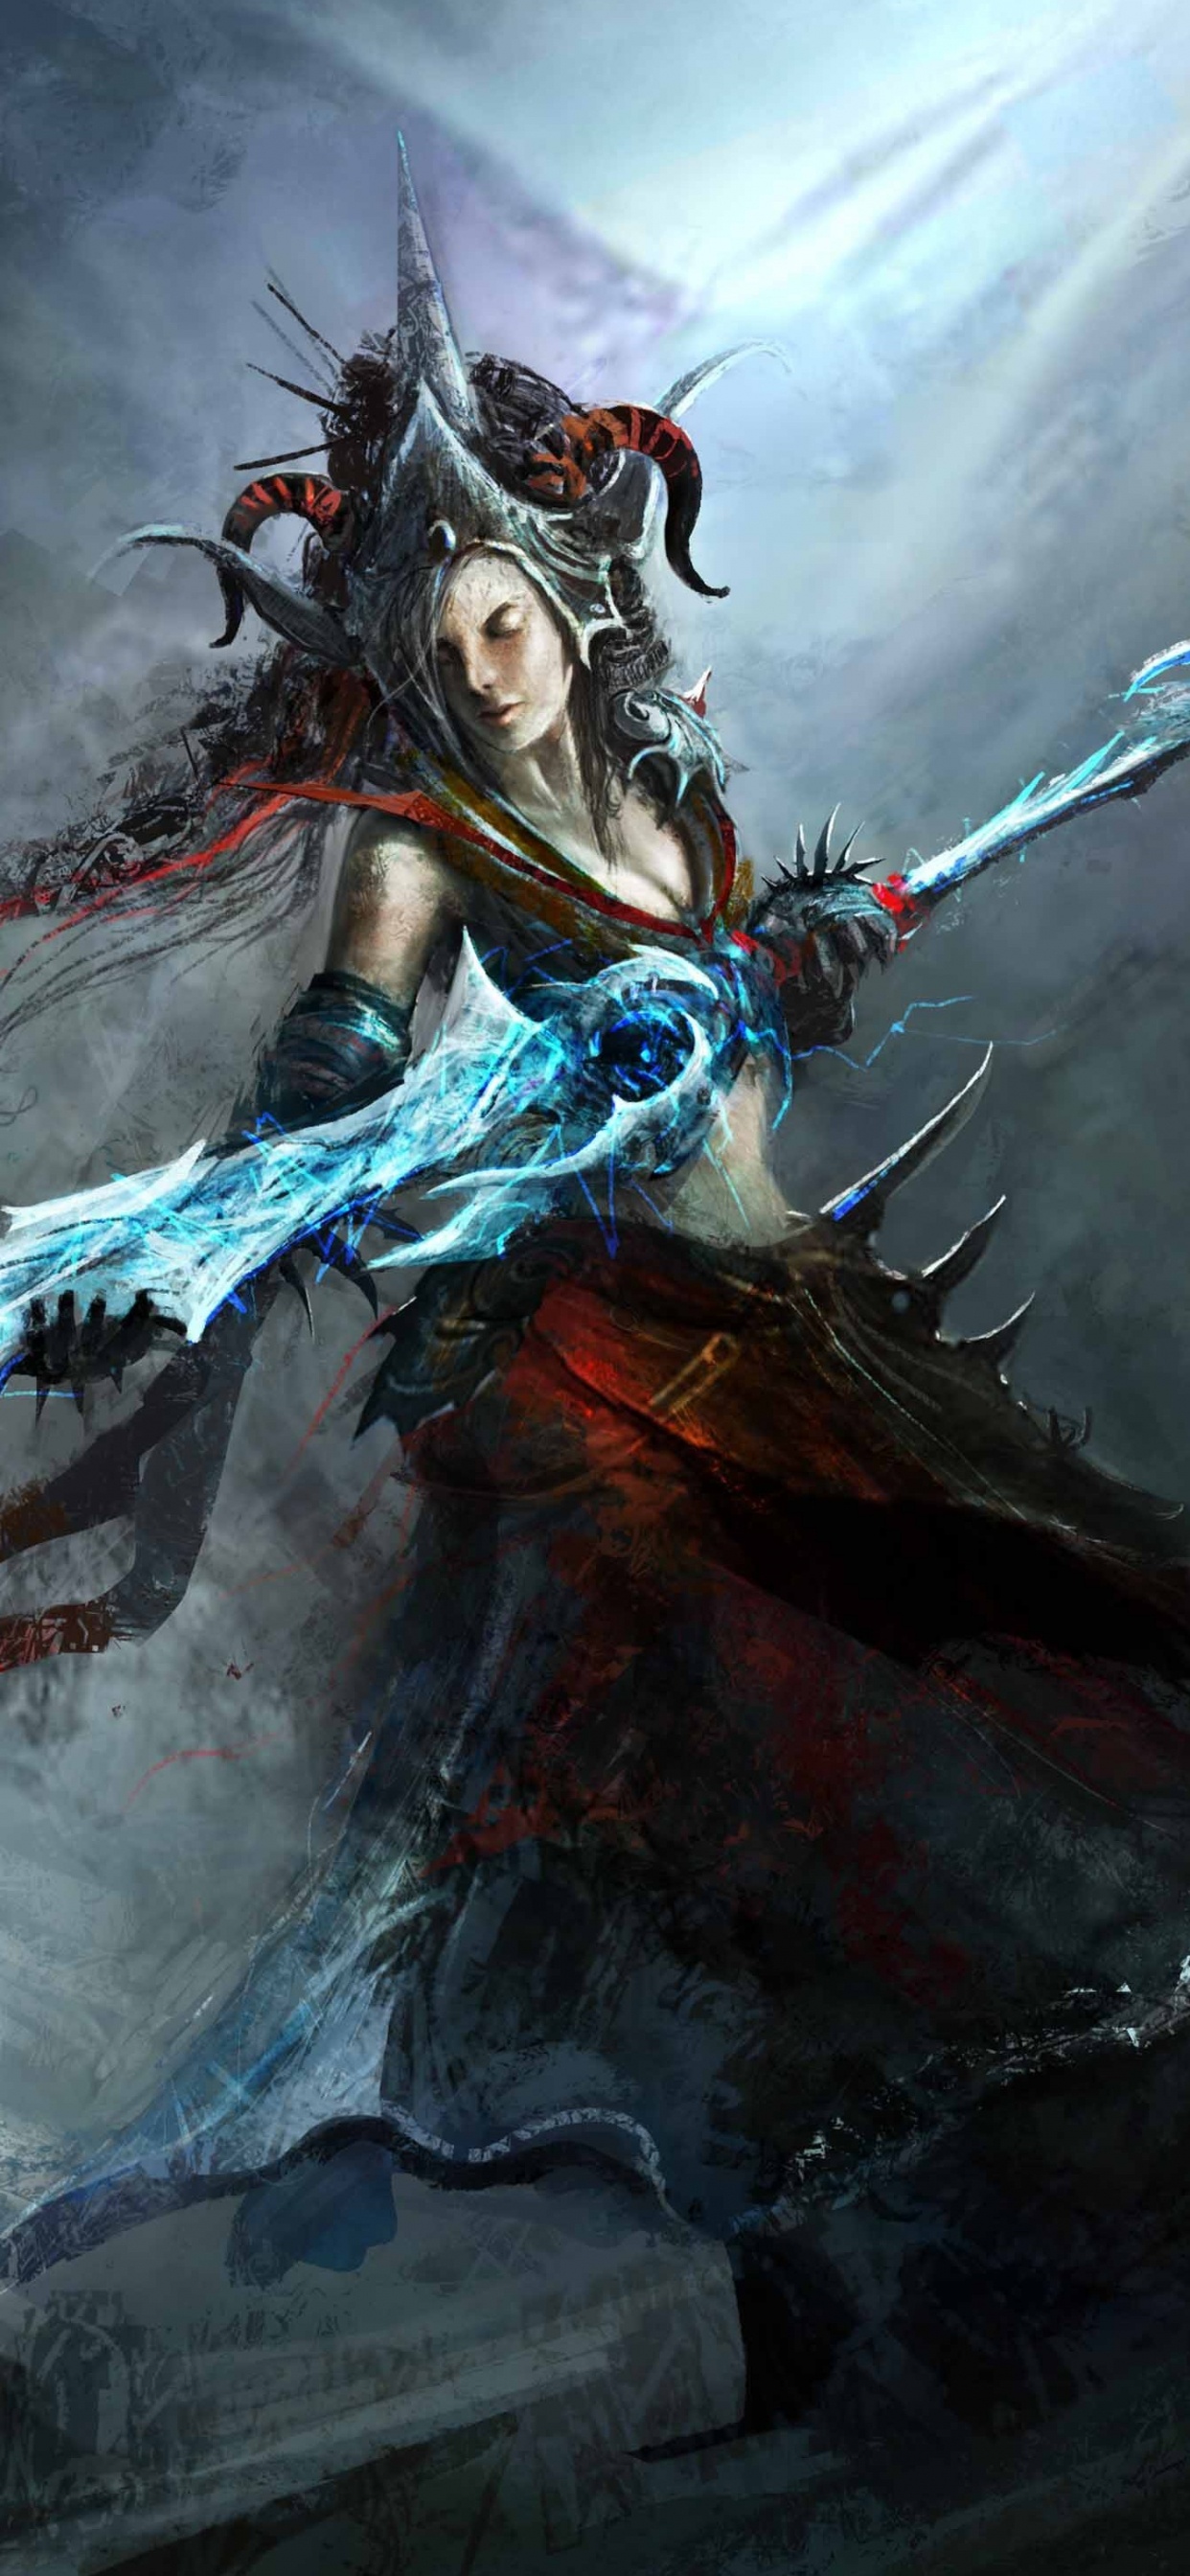 Woman in Blue Dress Holding a Sword Illustration. Wallpaper in 1242x2688 Resolution